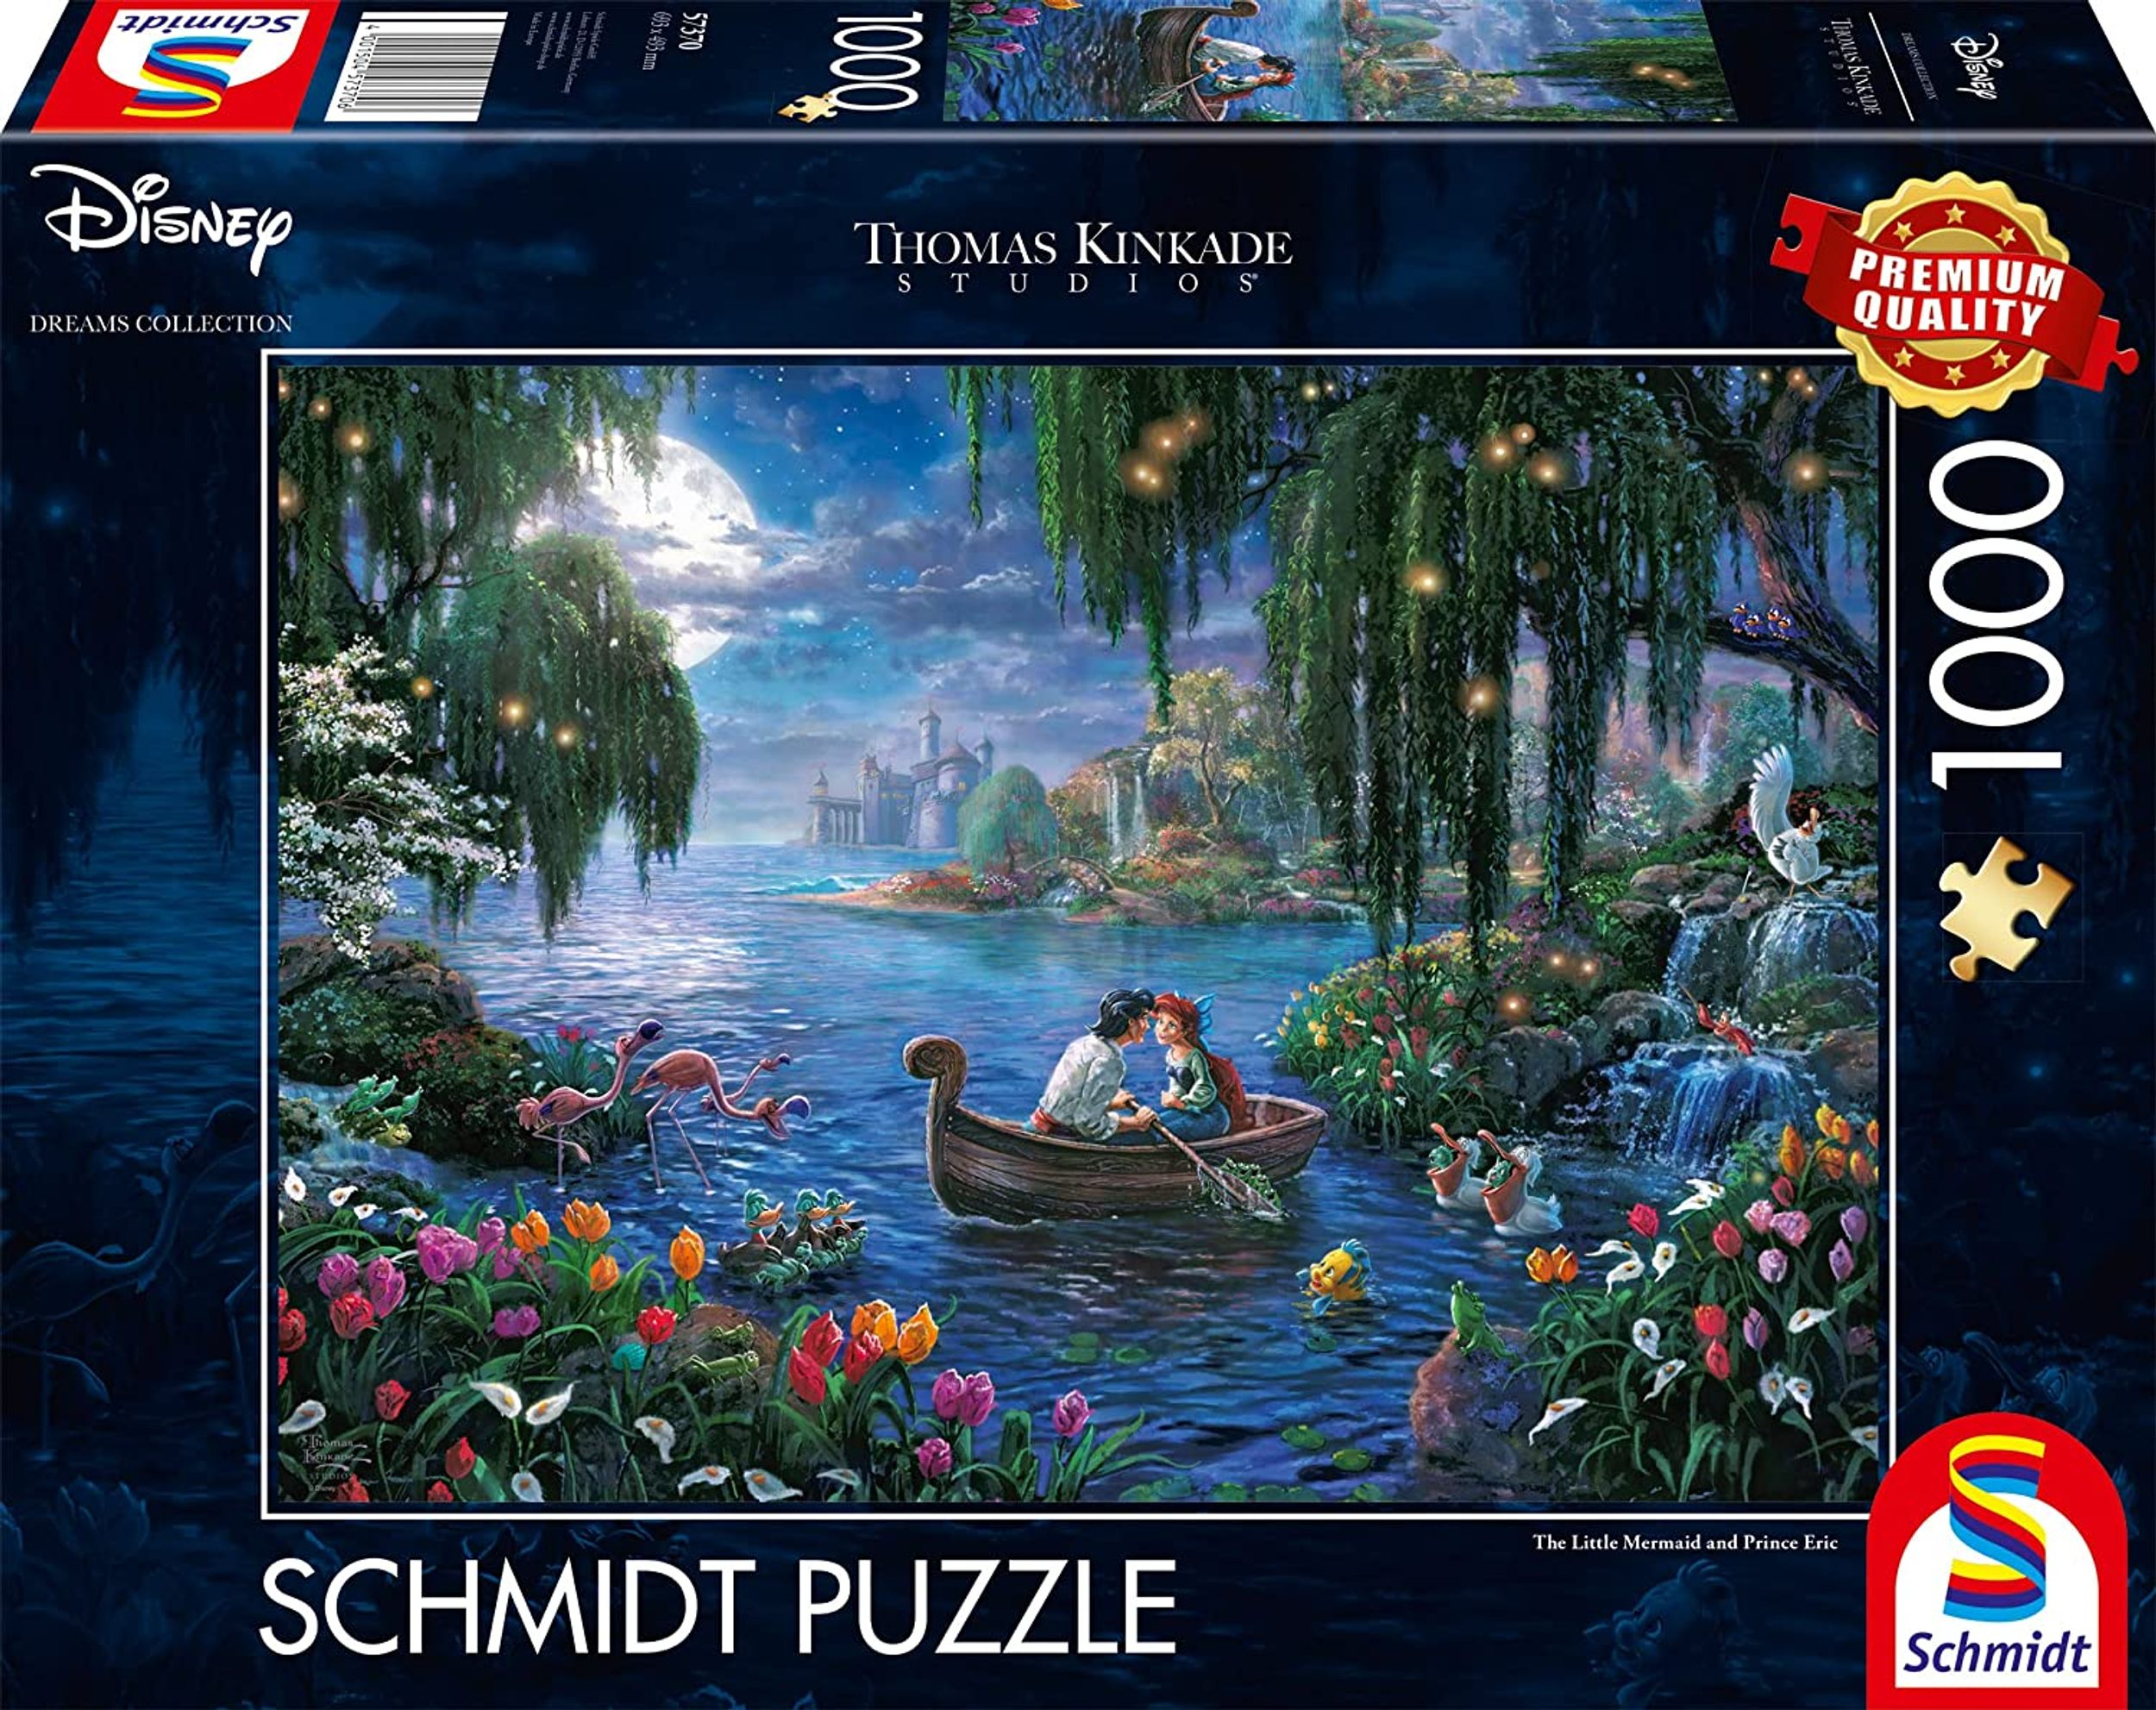 Prince and The Eric Puzzle SPIELE Little Mermaid SCHMIDT